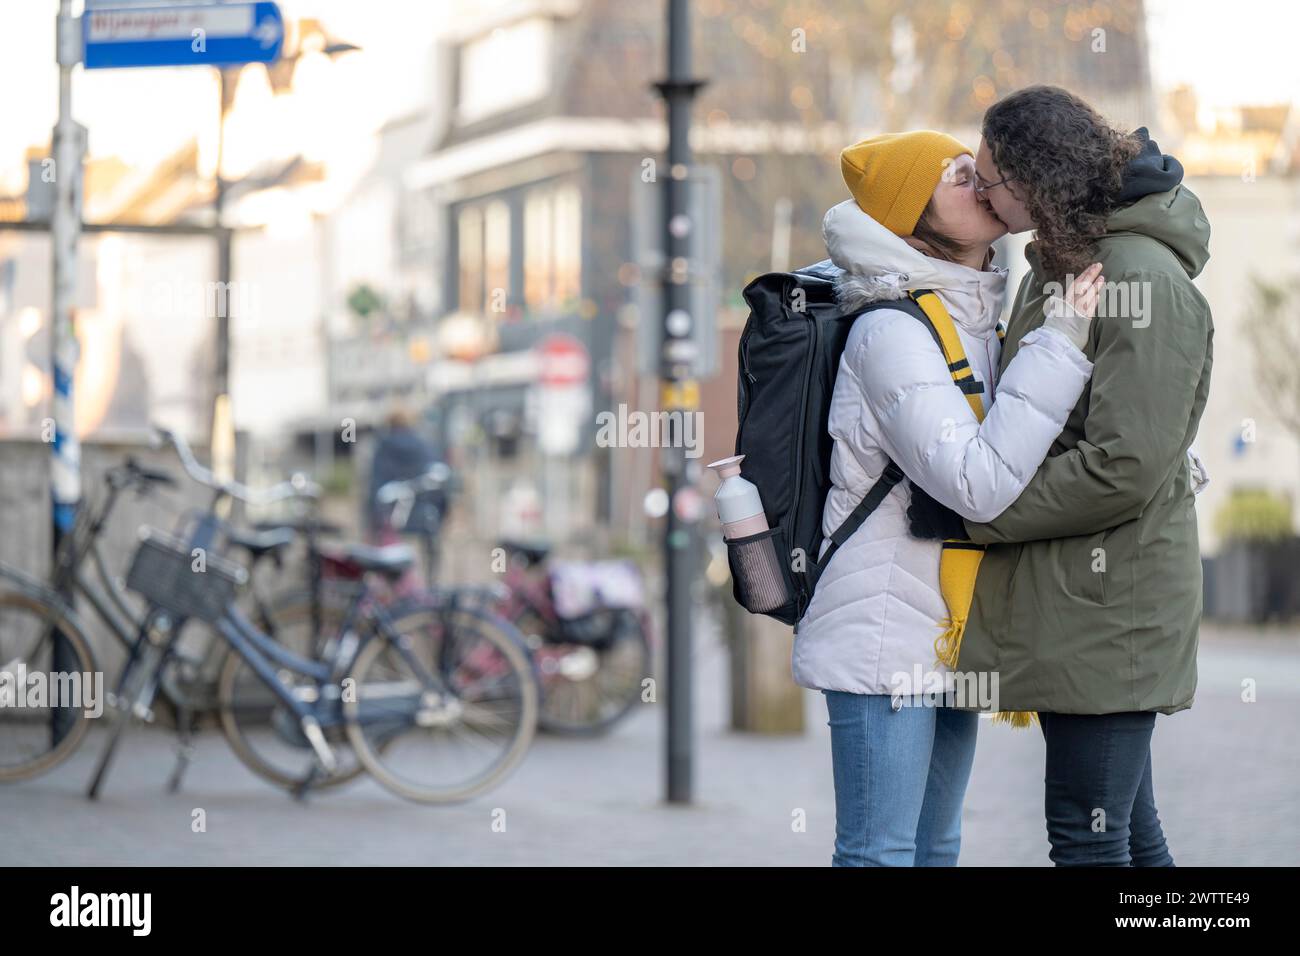 A tender moment as a couple kisses on a city street Stock Photo